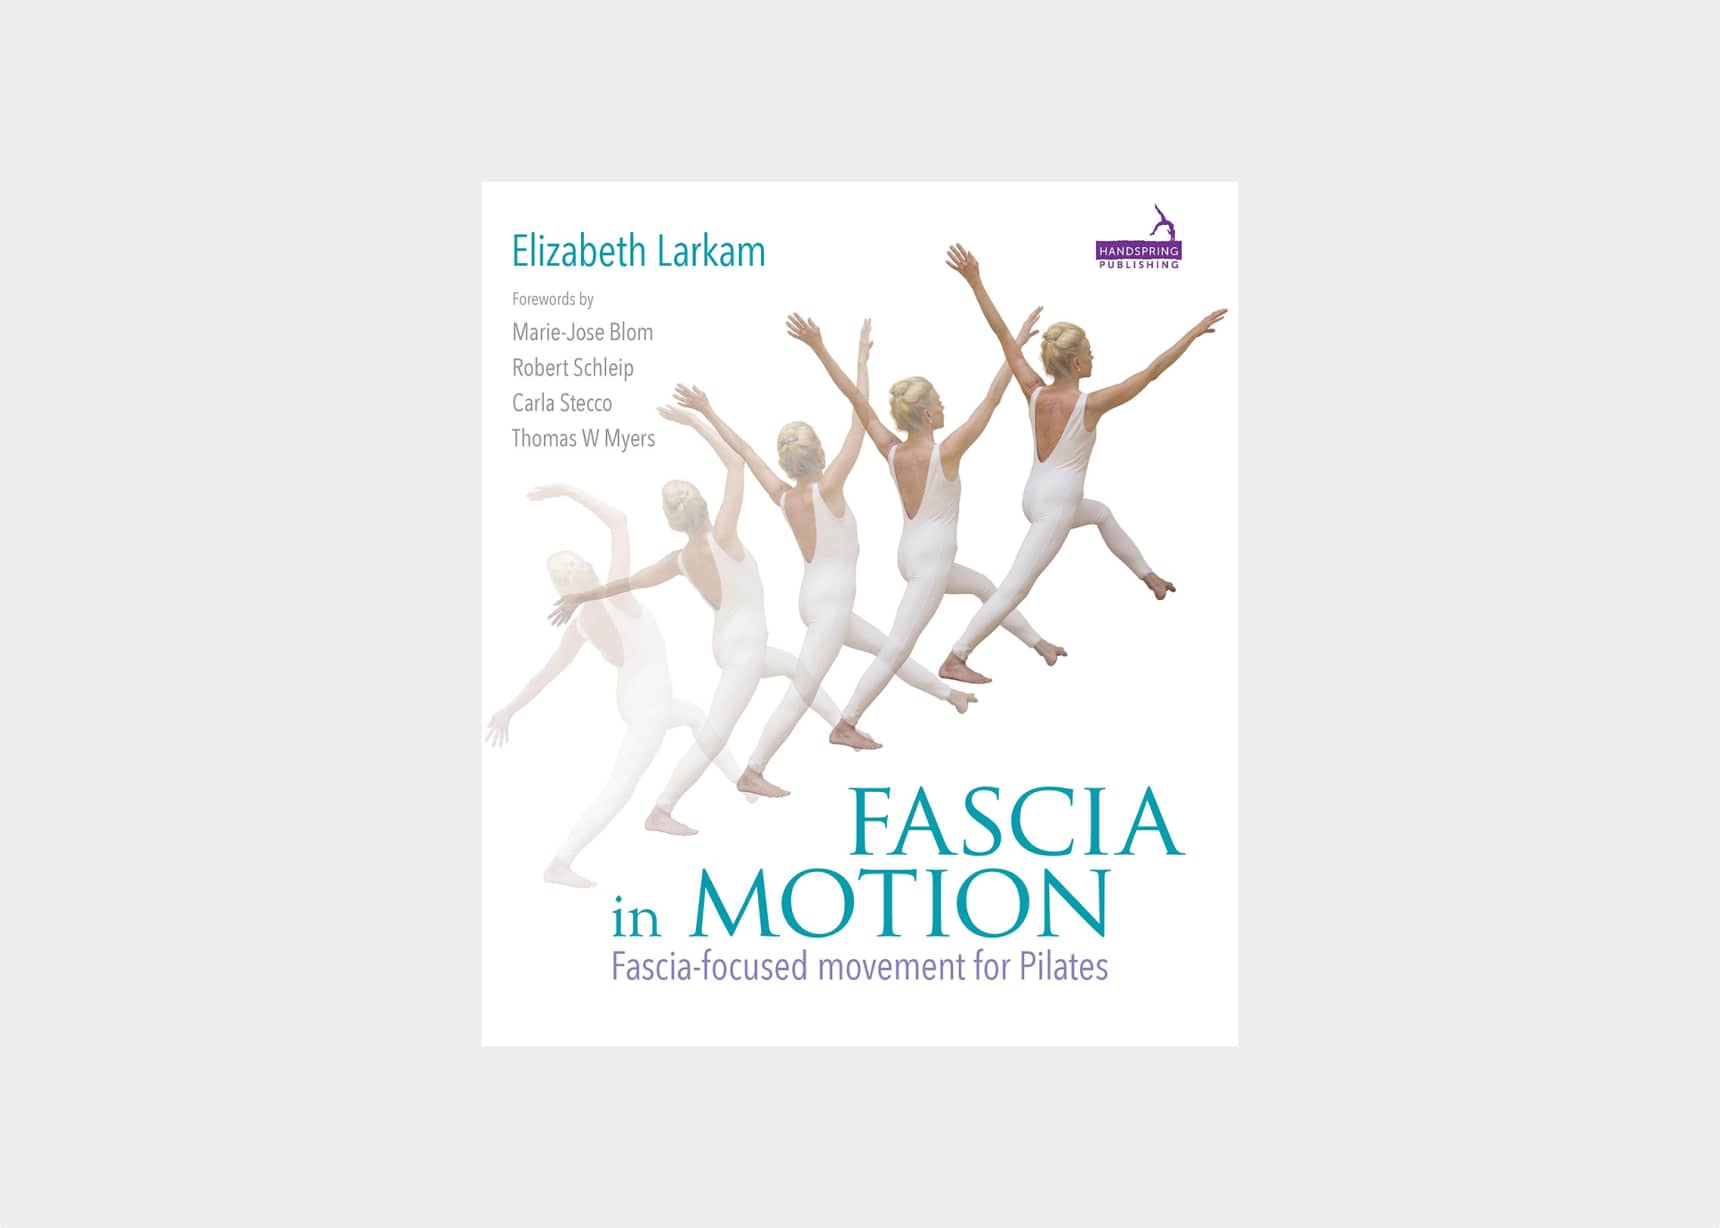 Fascia in Motion, a complete guide to fascia-focused Pilates movement.